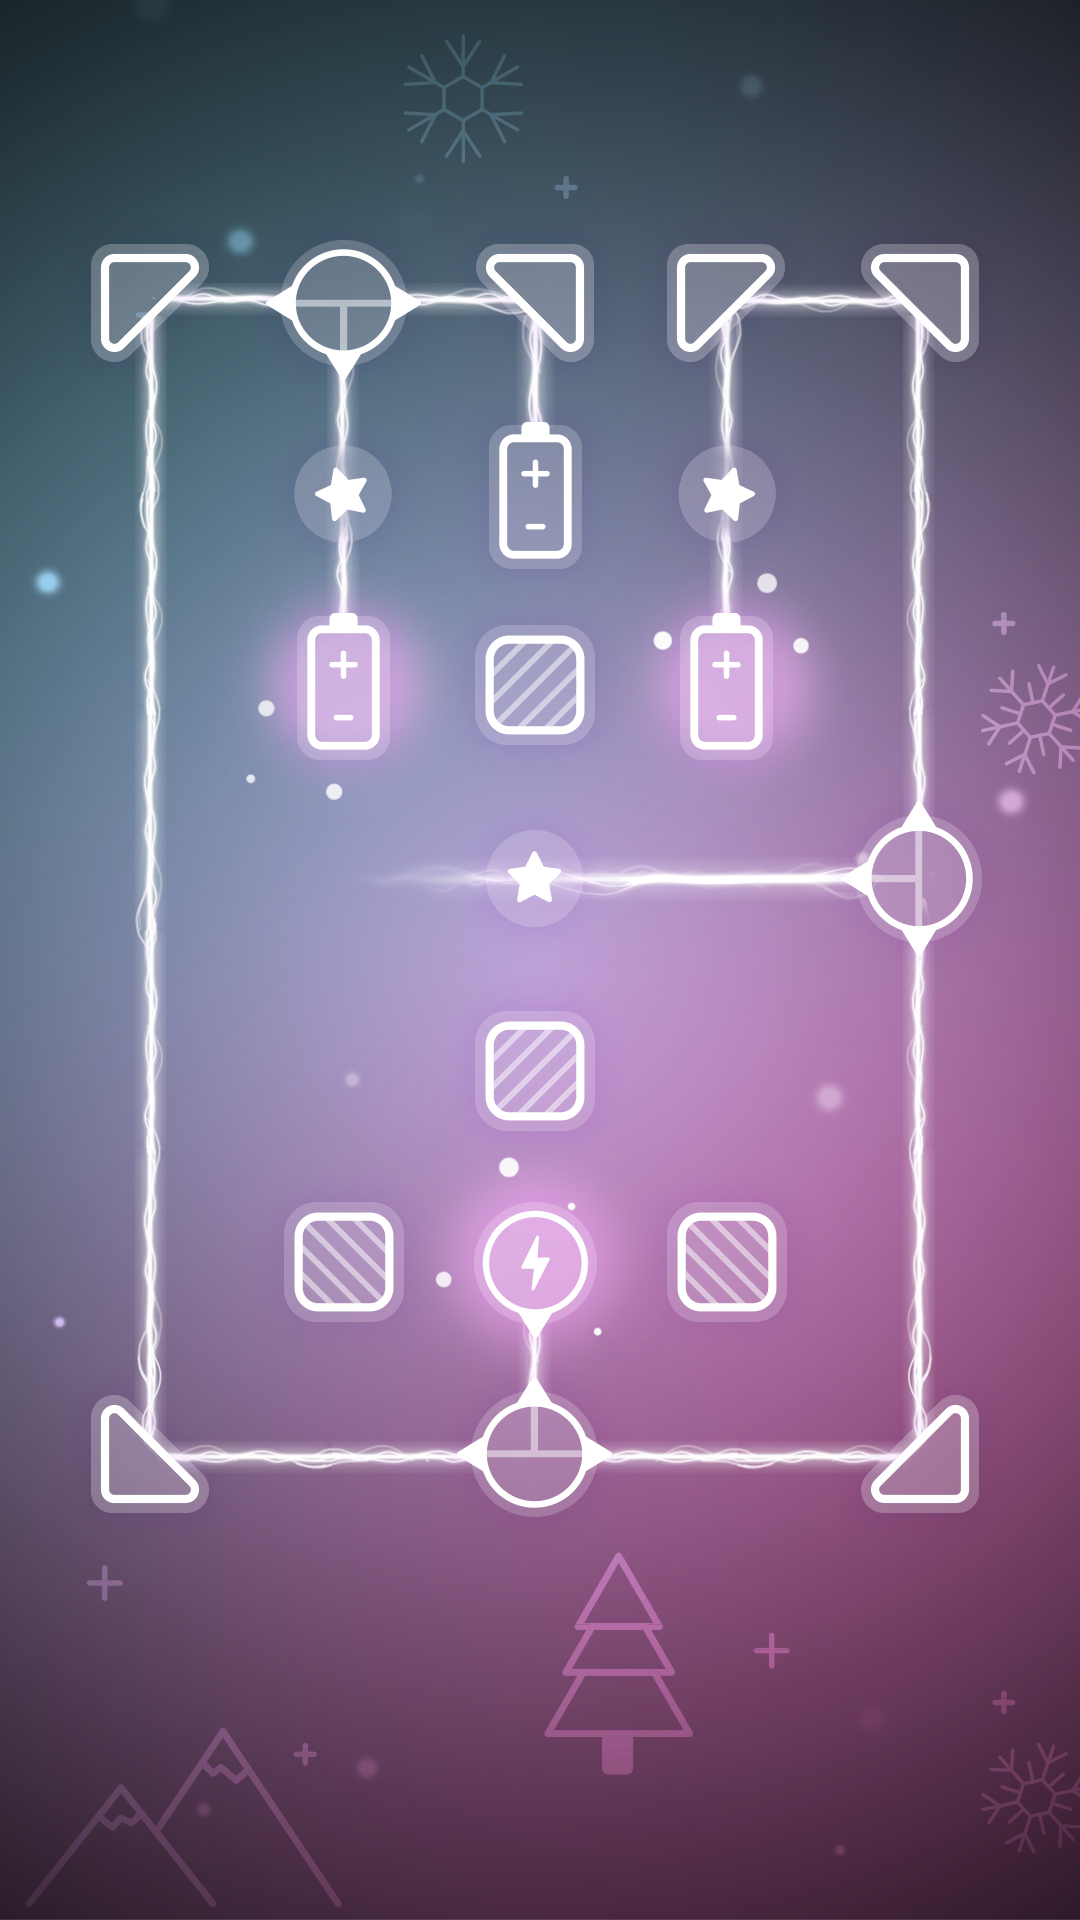 Laser Overload: Electric Brain APK 1.12.0 for Android – Download Laser  Overload: Electric Brain XAPK (APK Bundle) Latest Version from APKFab.com